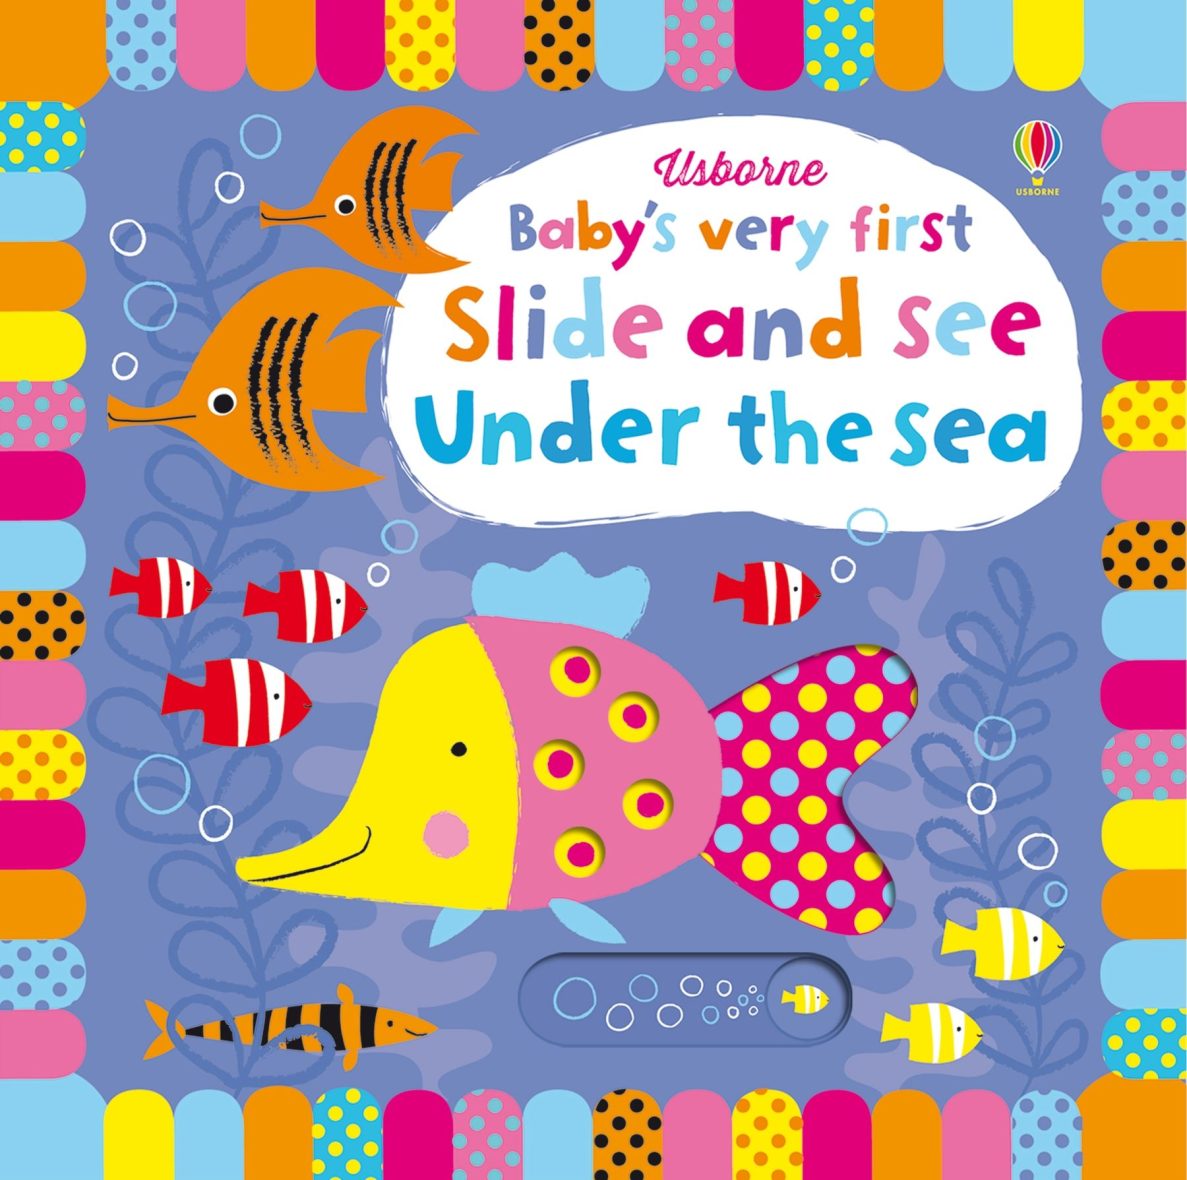 Usborne Baby’s Very First Slide and See Under The Sea